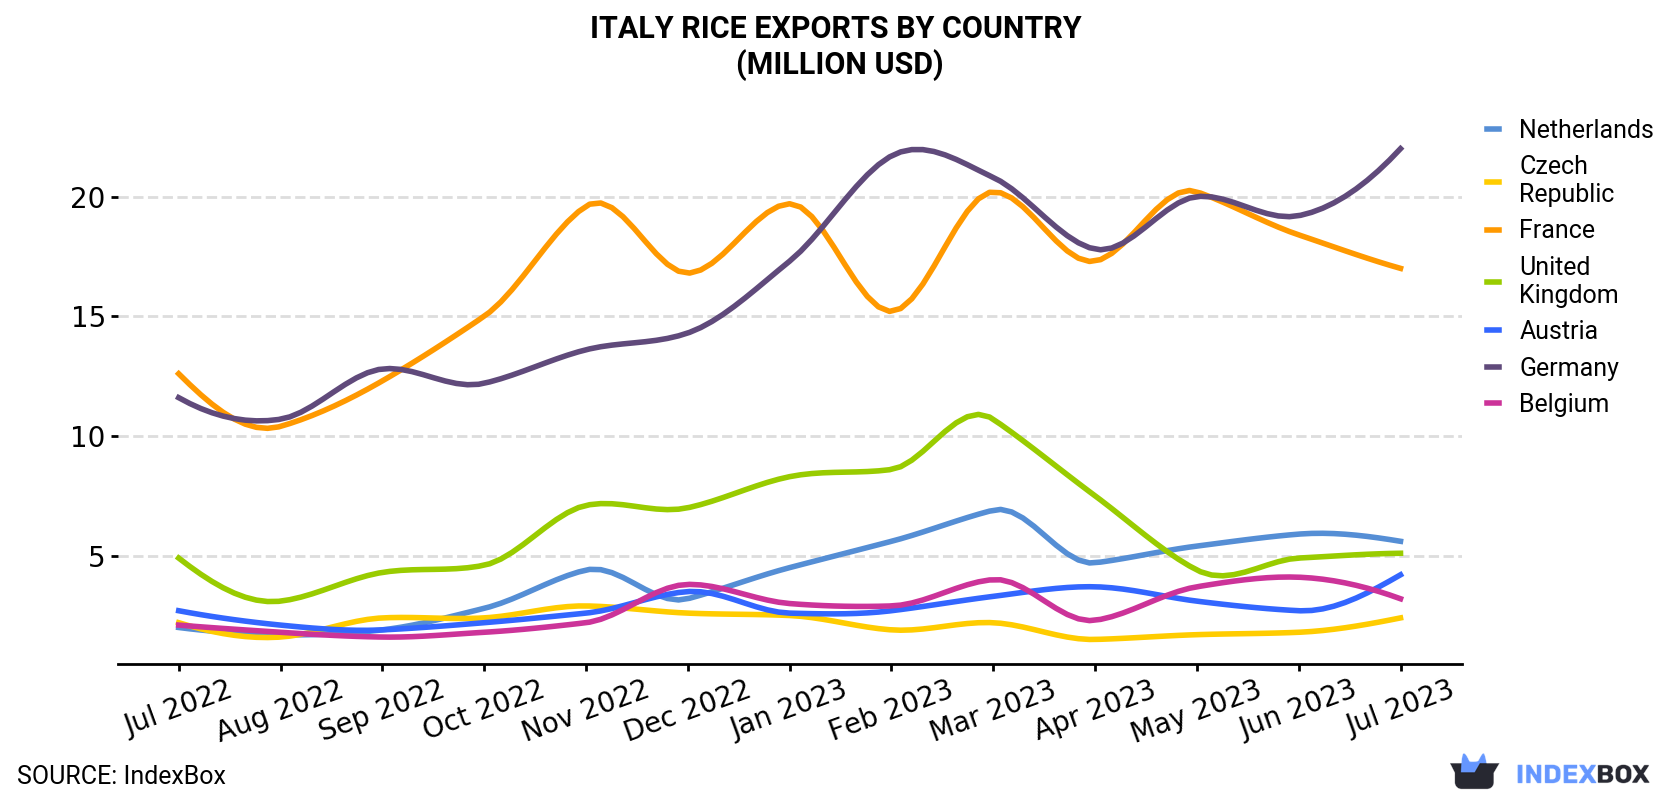 Italy Rice Exports By Country (Million USD)